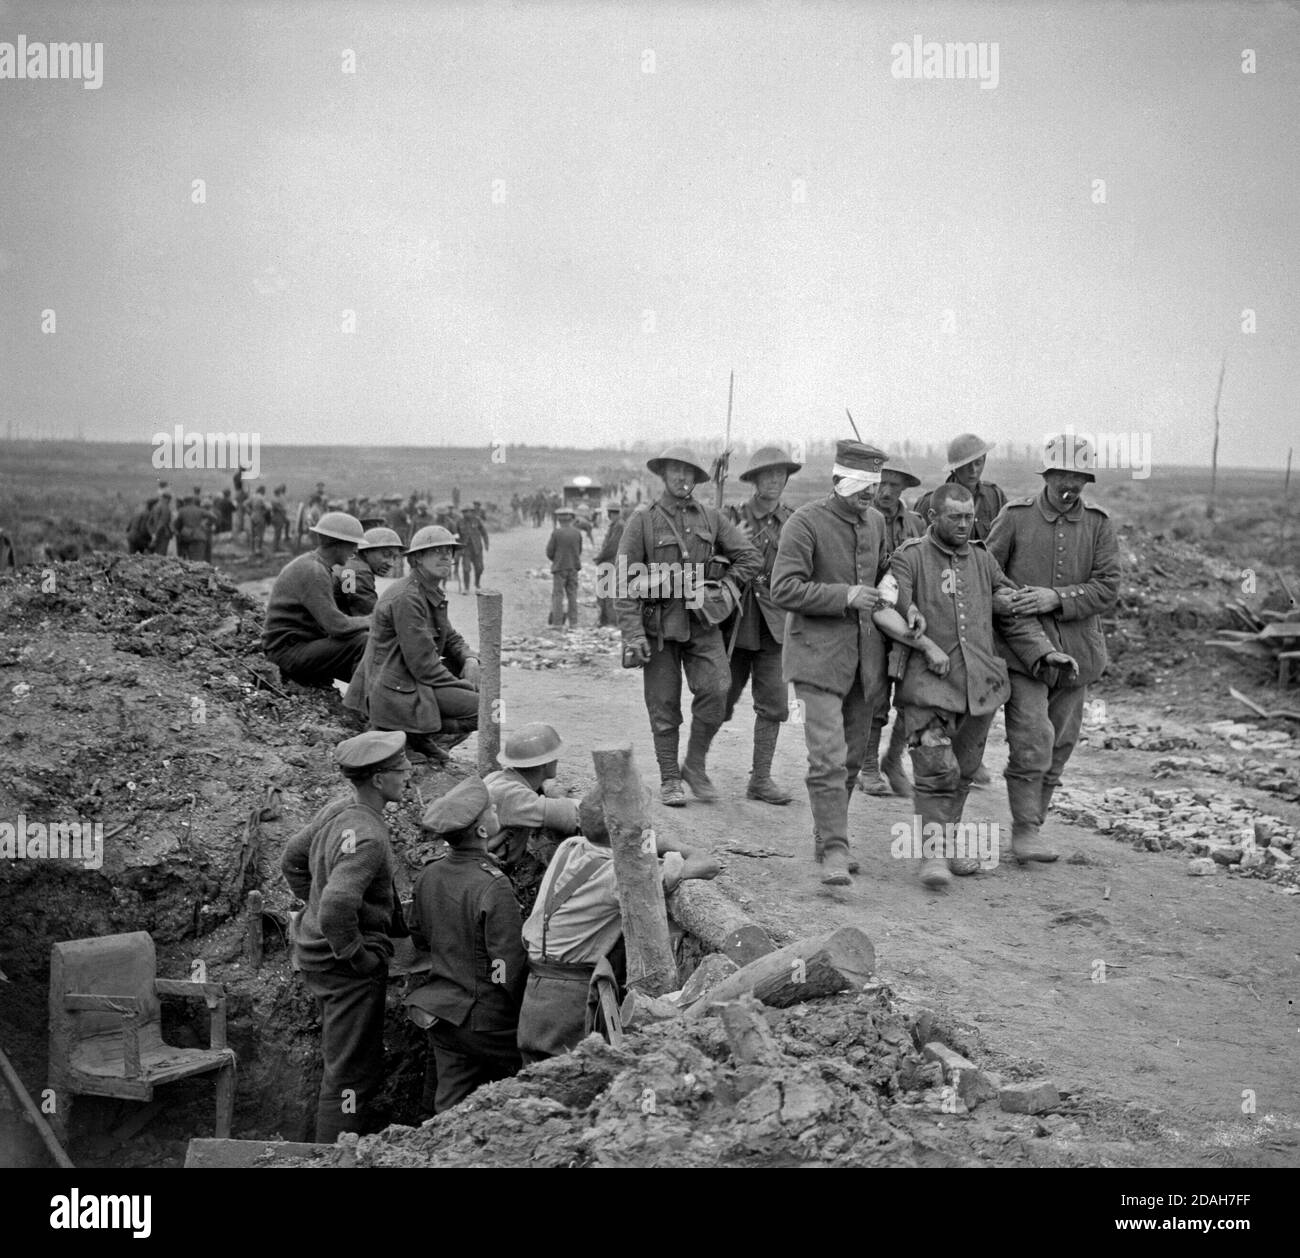 The Battle of the Somme, July-november 1916 Battle of Guillemont. British gunners watching German prisoners, wounded and visibly distressed, passing after the taking of Guillemont. Chimpanzee Valley, near Montauban. (Guillemont captured by 16th Irish Division on September 3rd 1916). Stock Photo